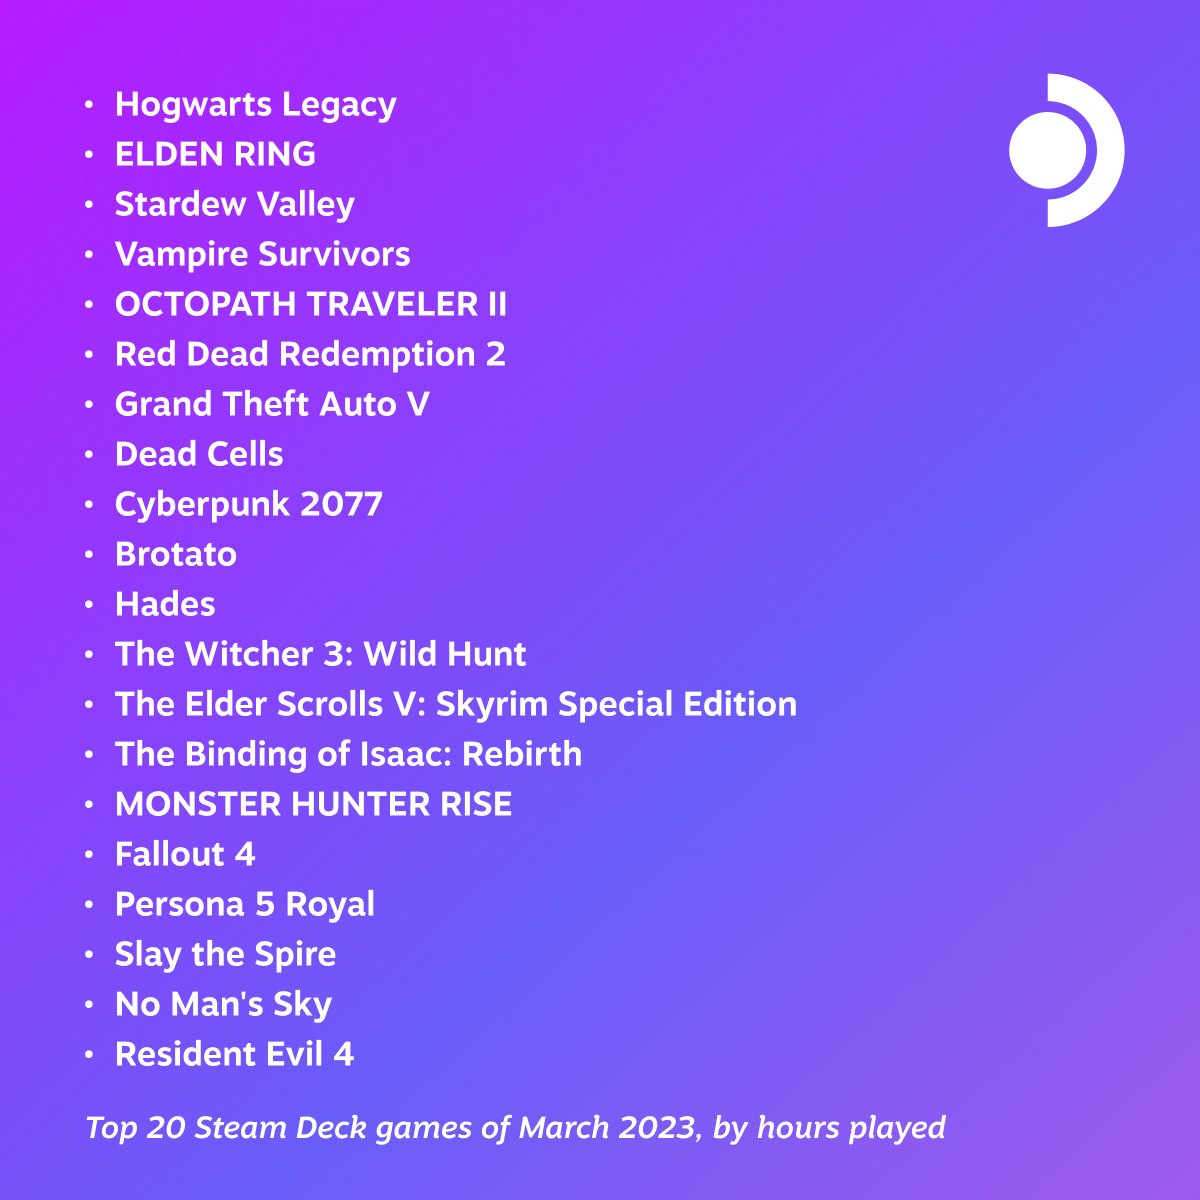 Hogwarts Legacy, Elden Ring, and Stardew Valley Lead 20 Most-Played Games  on Steam Deck for March 2023